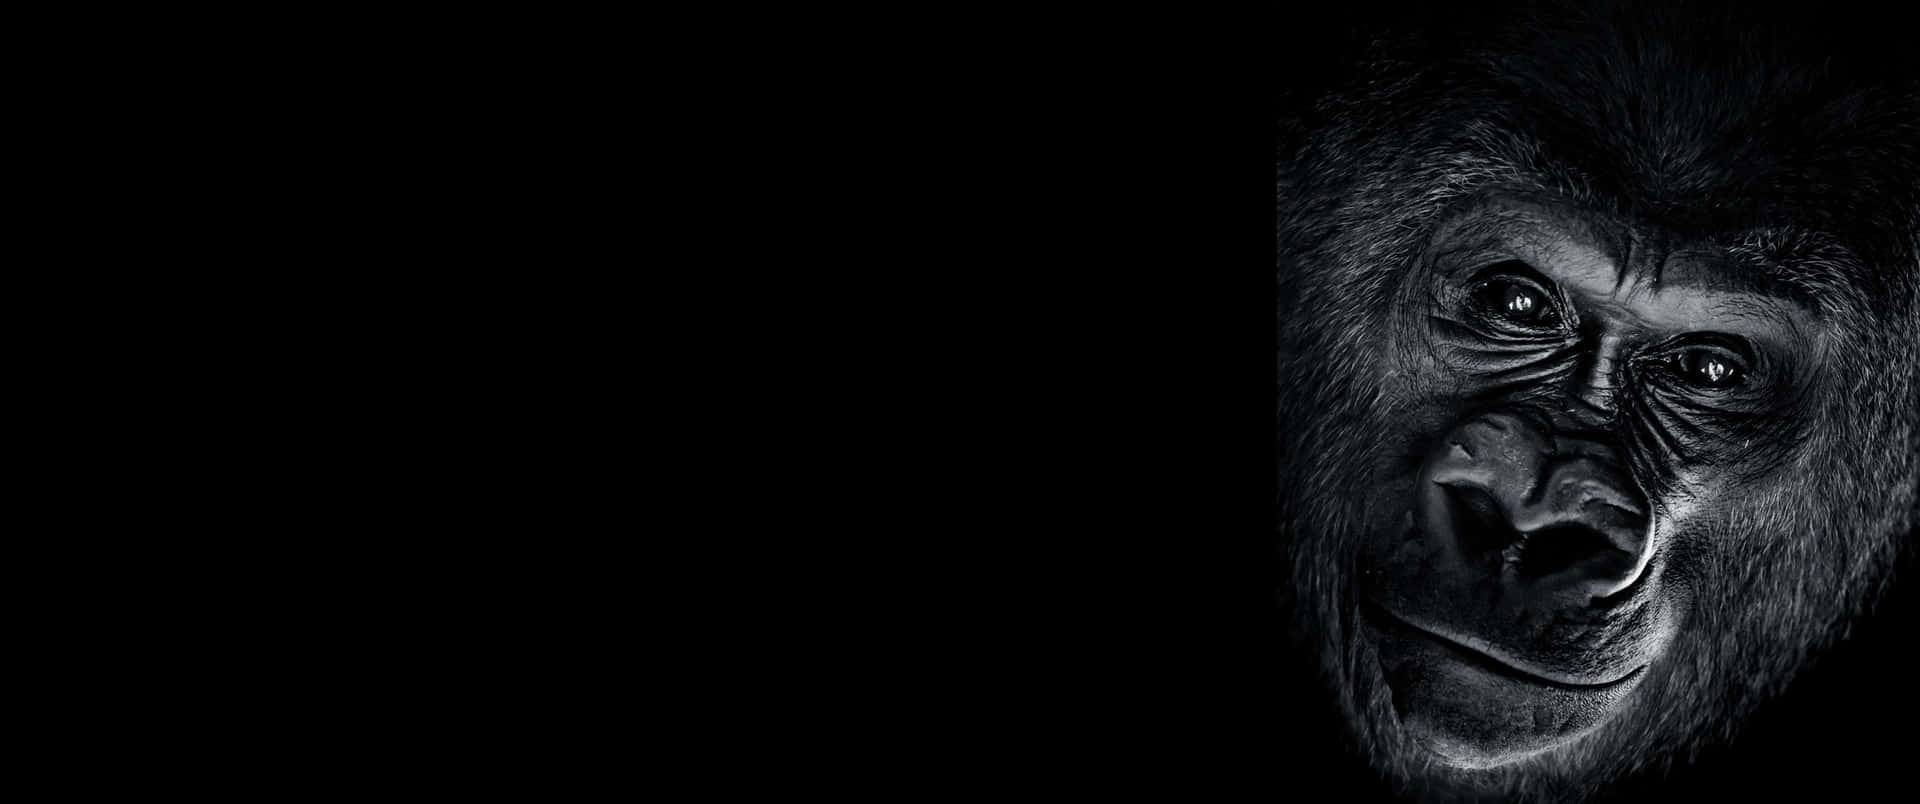 3440x1440p Gorilla Smiling At The Camera Background